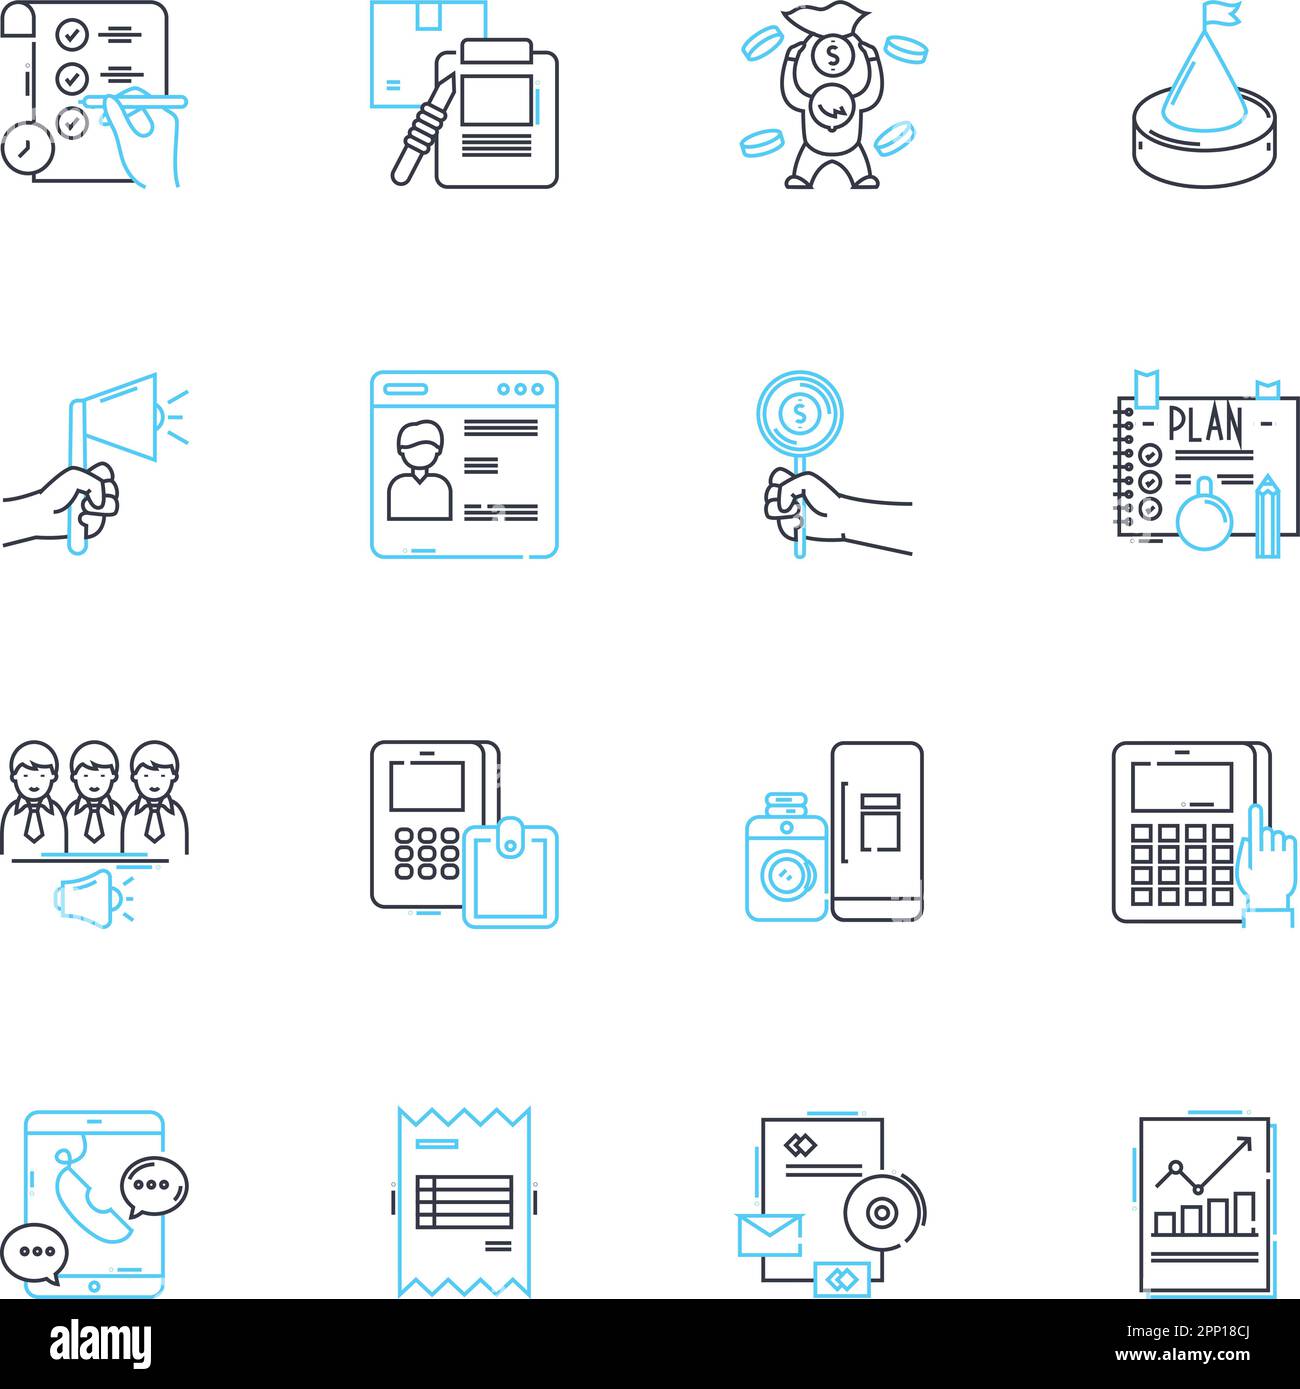 Expense control linear icons set. Budgeting, Tracking, Analysis, Cost-cutting, Efficiency, Optimization, Planning line vector and concept signs Stock Vector